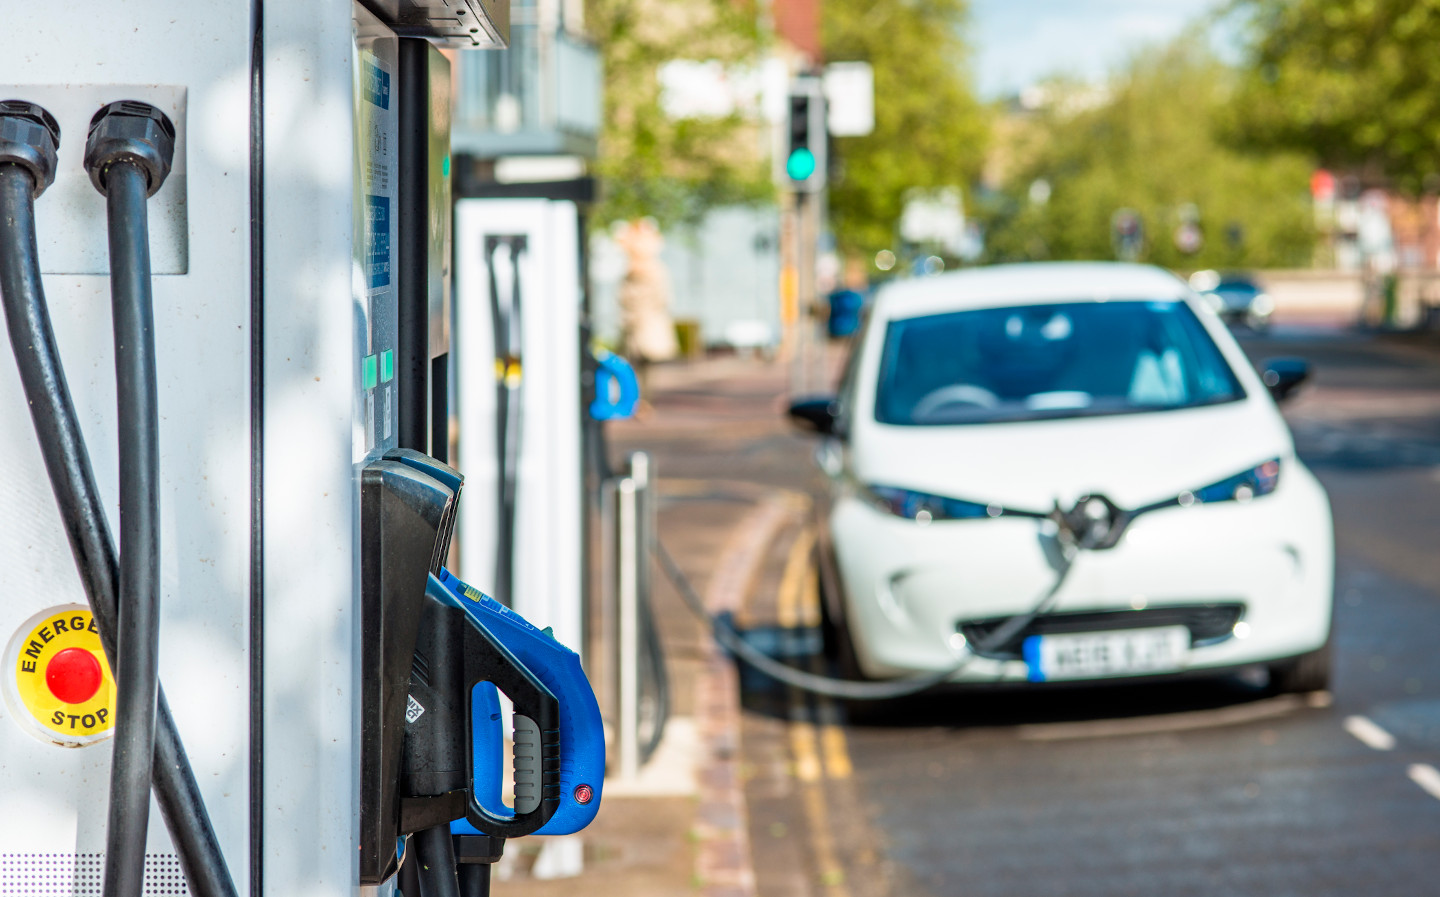 Transition to electric cars could be worth £24bn, says report